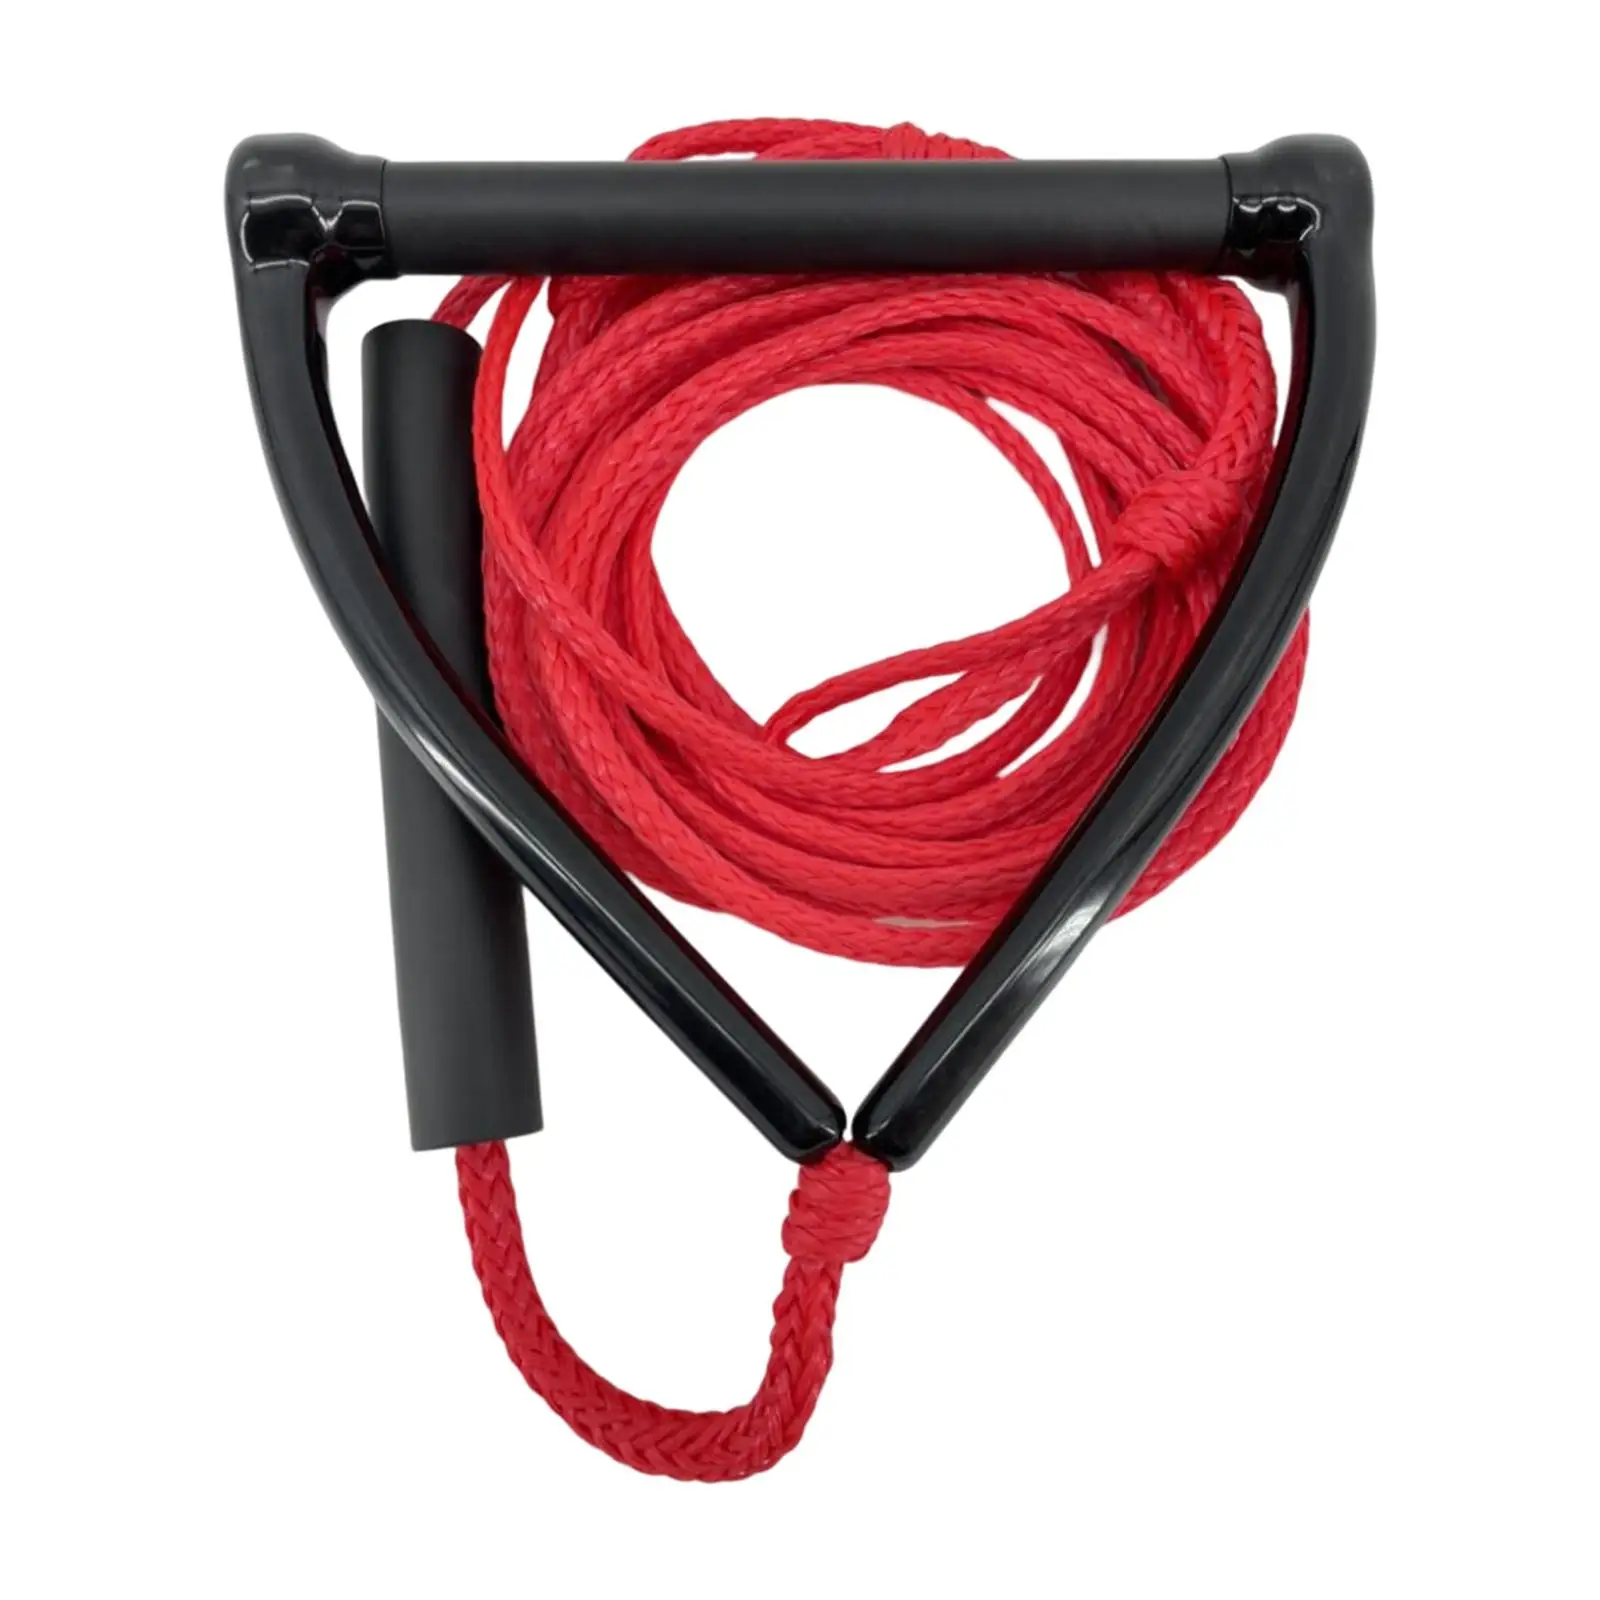 Water Ski Rope Water Sports Rope Portable Water Ski Tow Rope for Kneeboard